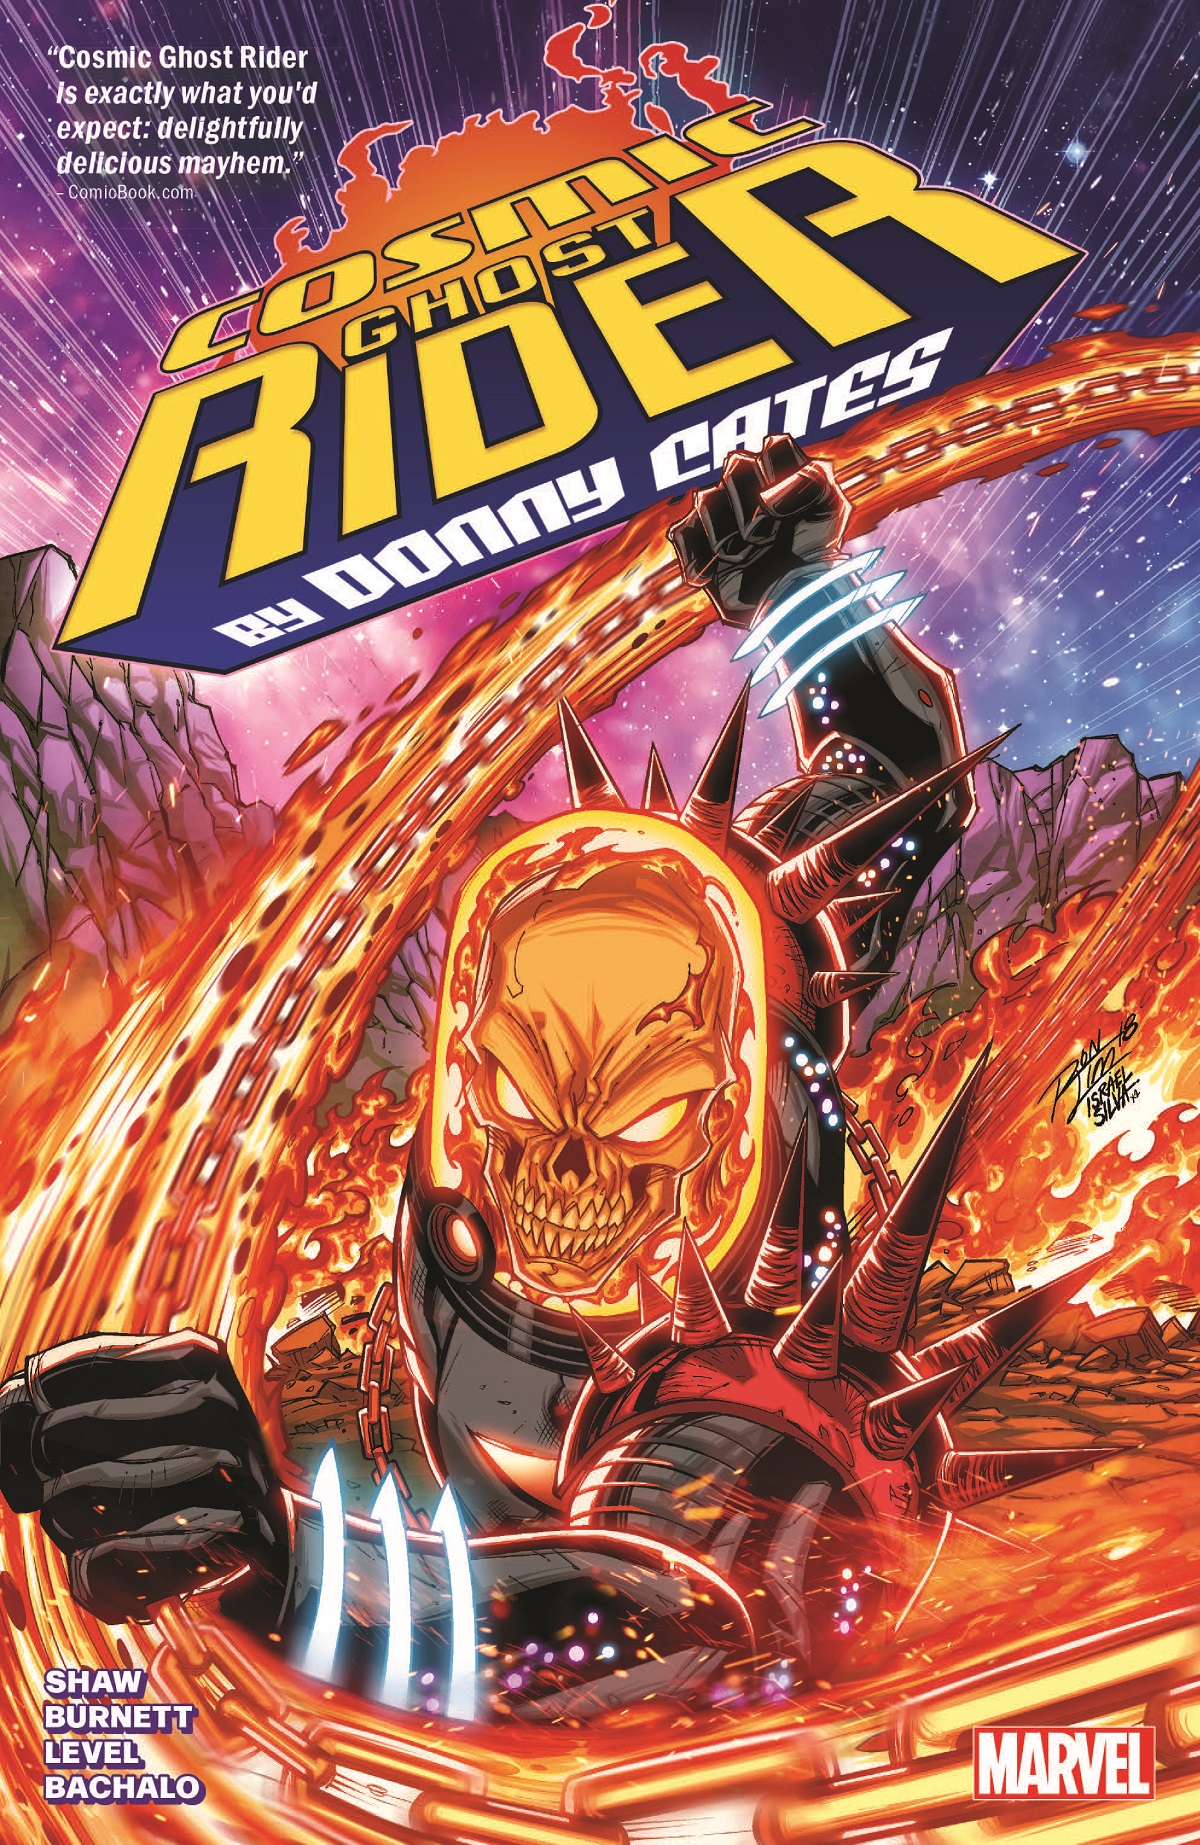 Cosmic Ghost Rider By Donny Cates (Trade Paperback)